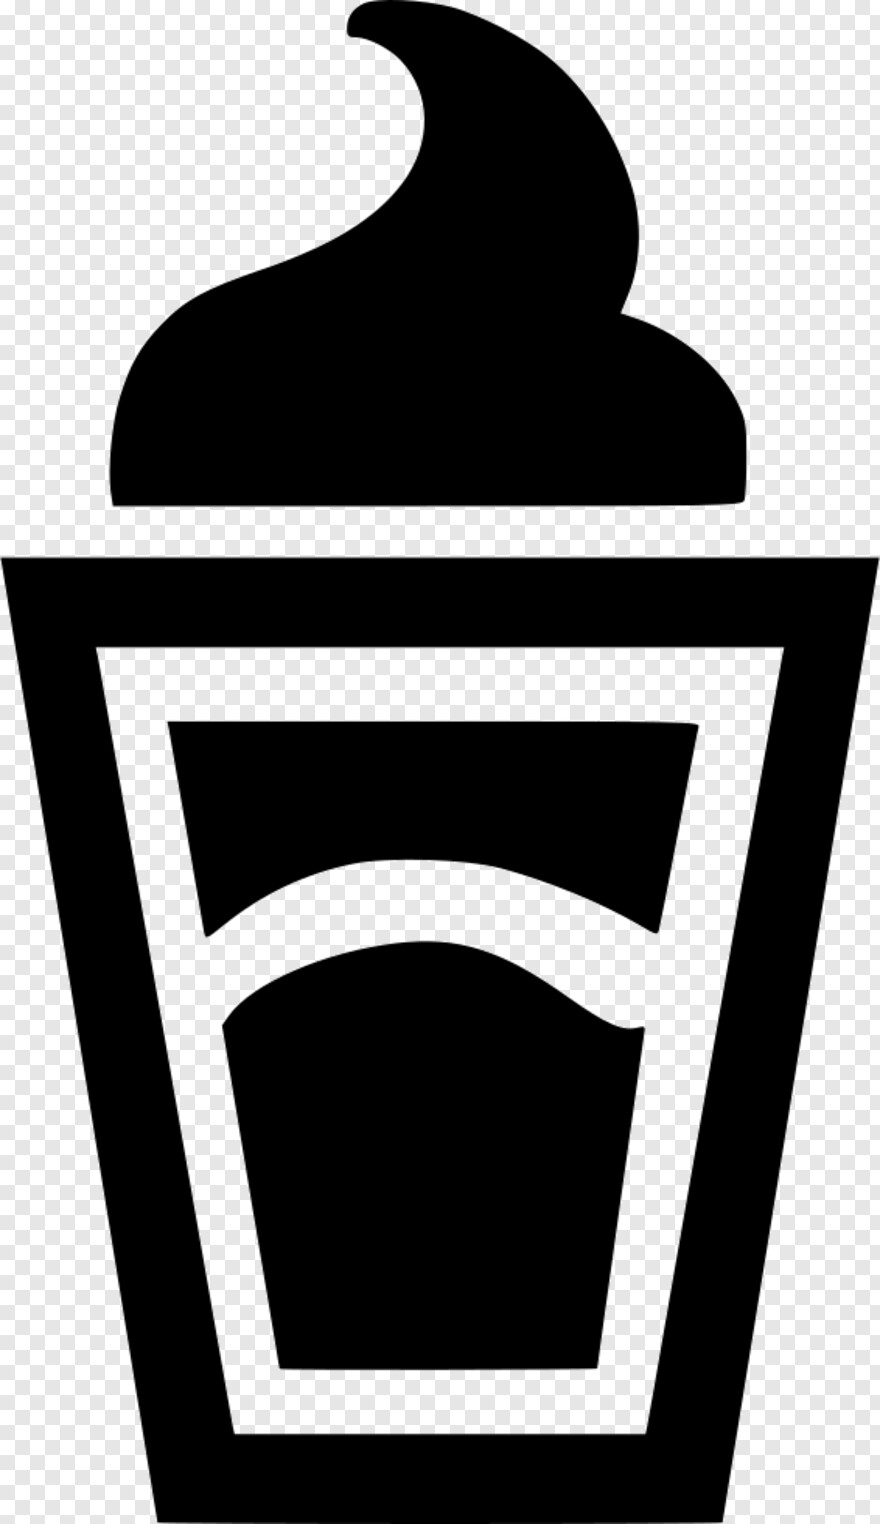 coffee-cup-clipart # 403132